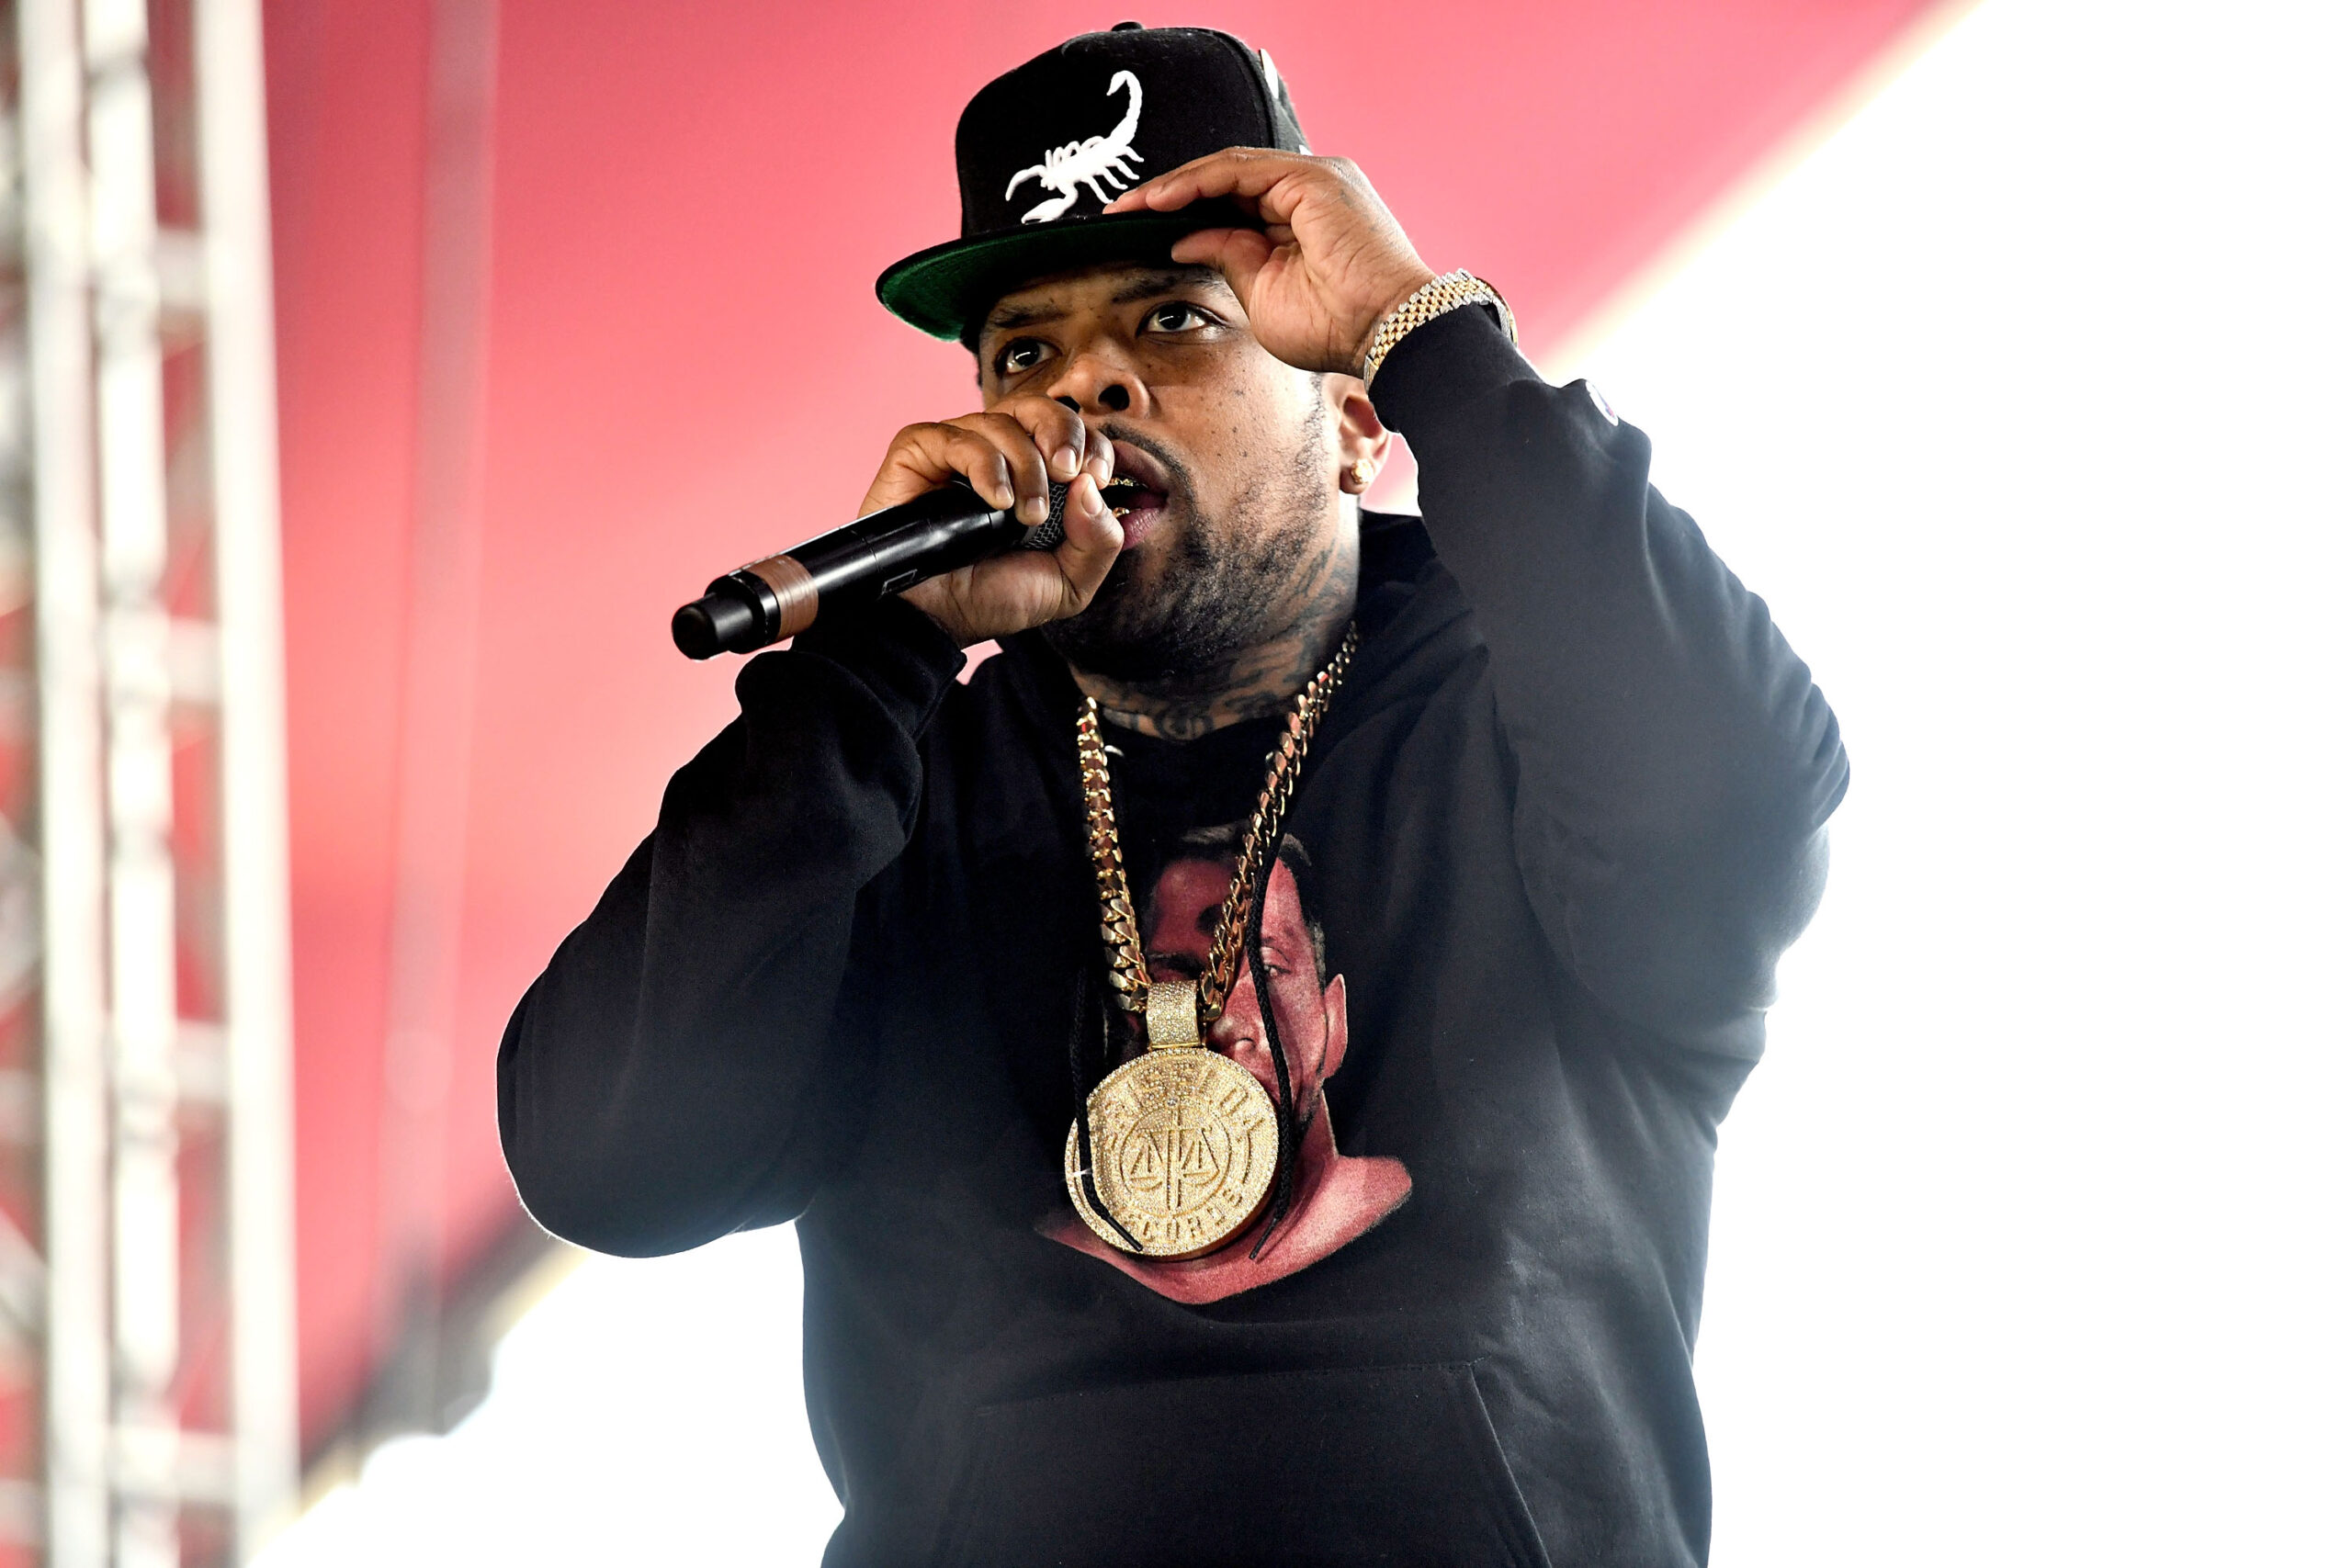 Westside Gunn’s “And Then You Pray For Me”: What We Know